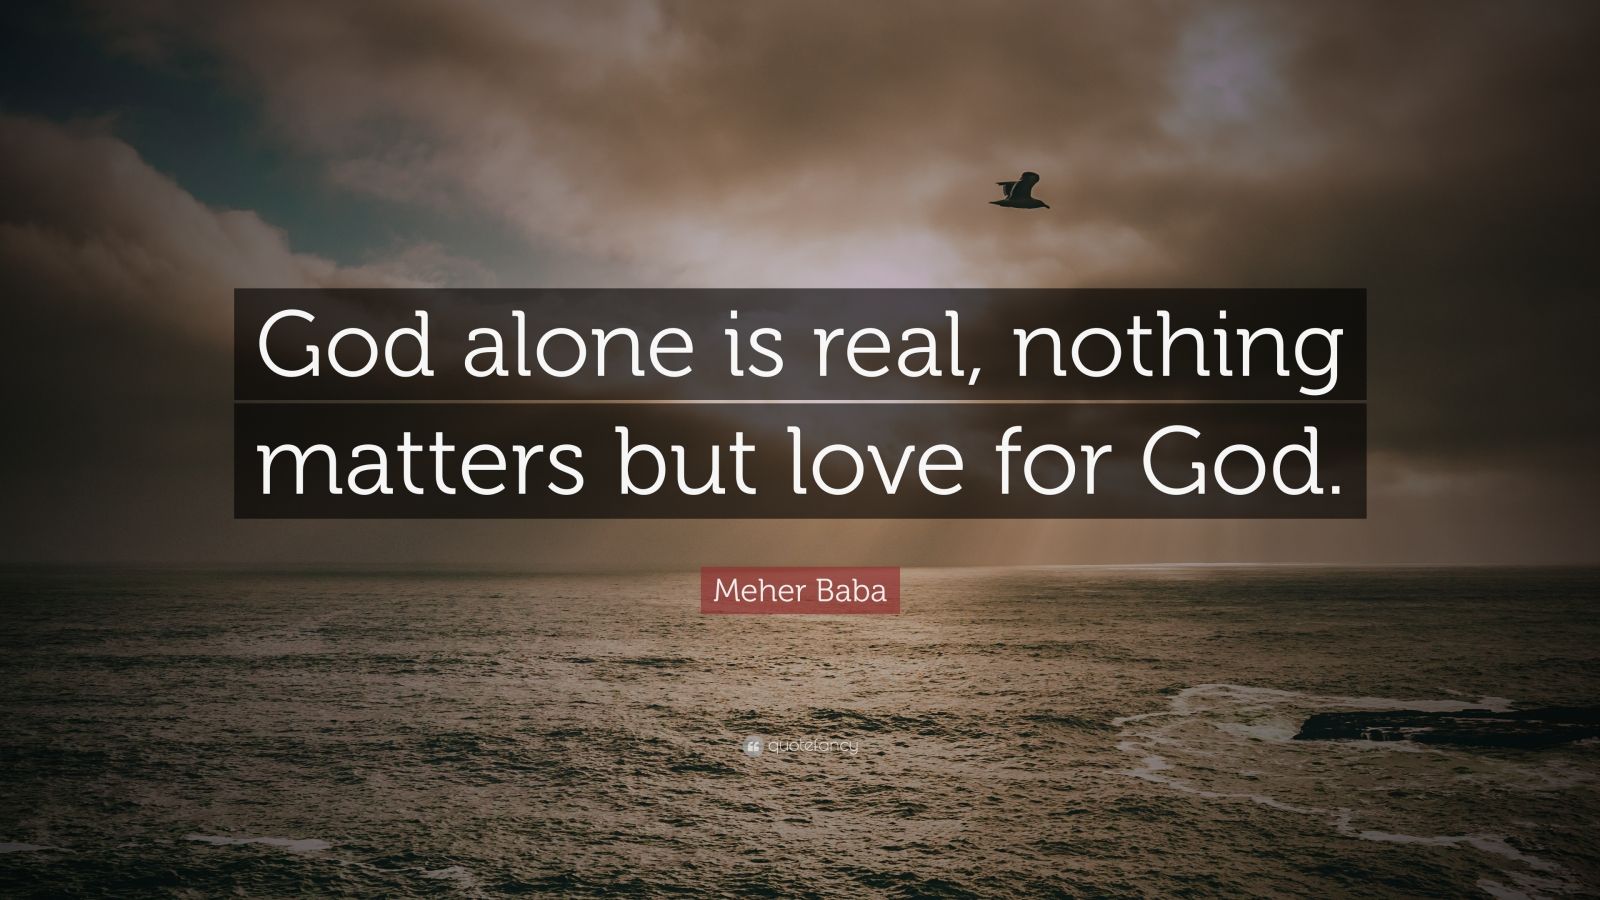 is god real quotes